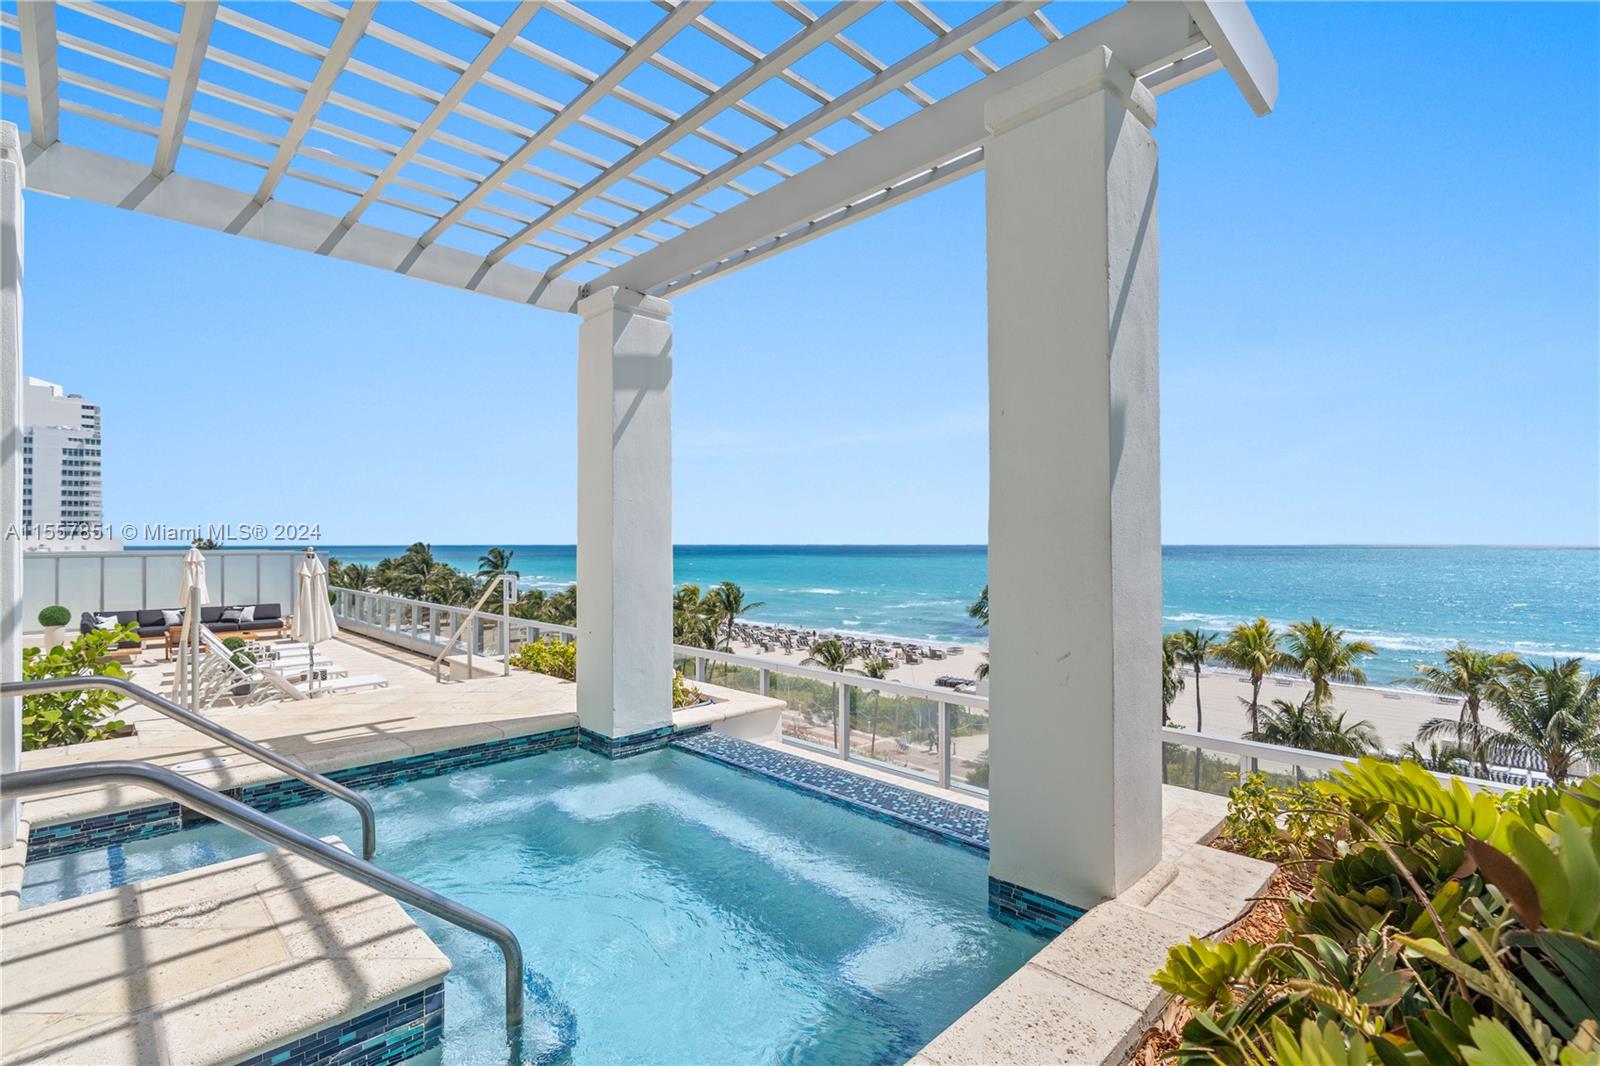 Embrace luxury living at the prestigious Fontainebleau resort in this oceanfront, furnished/turnkey 5BD/6.5BA 2 story residence. This home features magnificent living areas with volume ceilings, direct ocean views, spa with steam room, large kitchen with ocean view & luxurious oceanfront suites, creating an unparalleled living space. This truly unique property boasts an immense oceanfront terrace enhanced w/ private pool and hot tub, perfect for entertaining. Option to enroll in hotel rental program & receive income while away. The Fontainebleau offers luxury amenities on 22 oceanfront acres including award-winning restaurants, LIV night club, Lapis spa & state-of-the-art fitness center. Maintenance fee includes AC, local calls, electricity, valet + daily breakfast in the owners lounge.